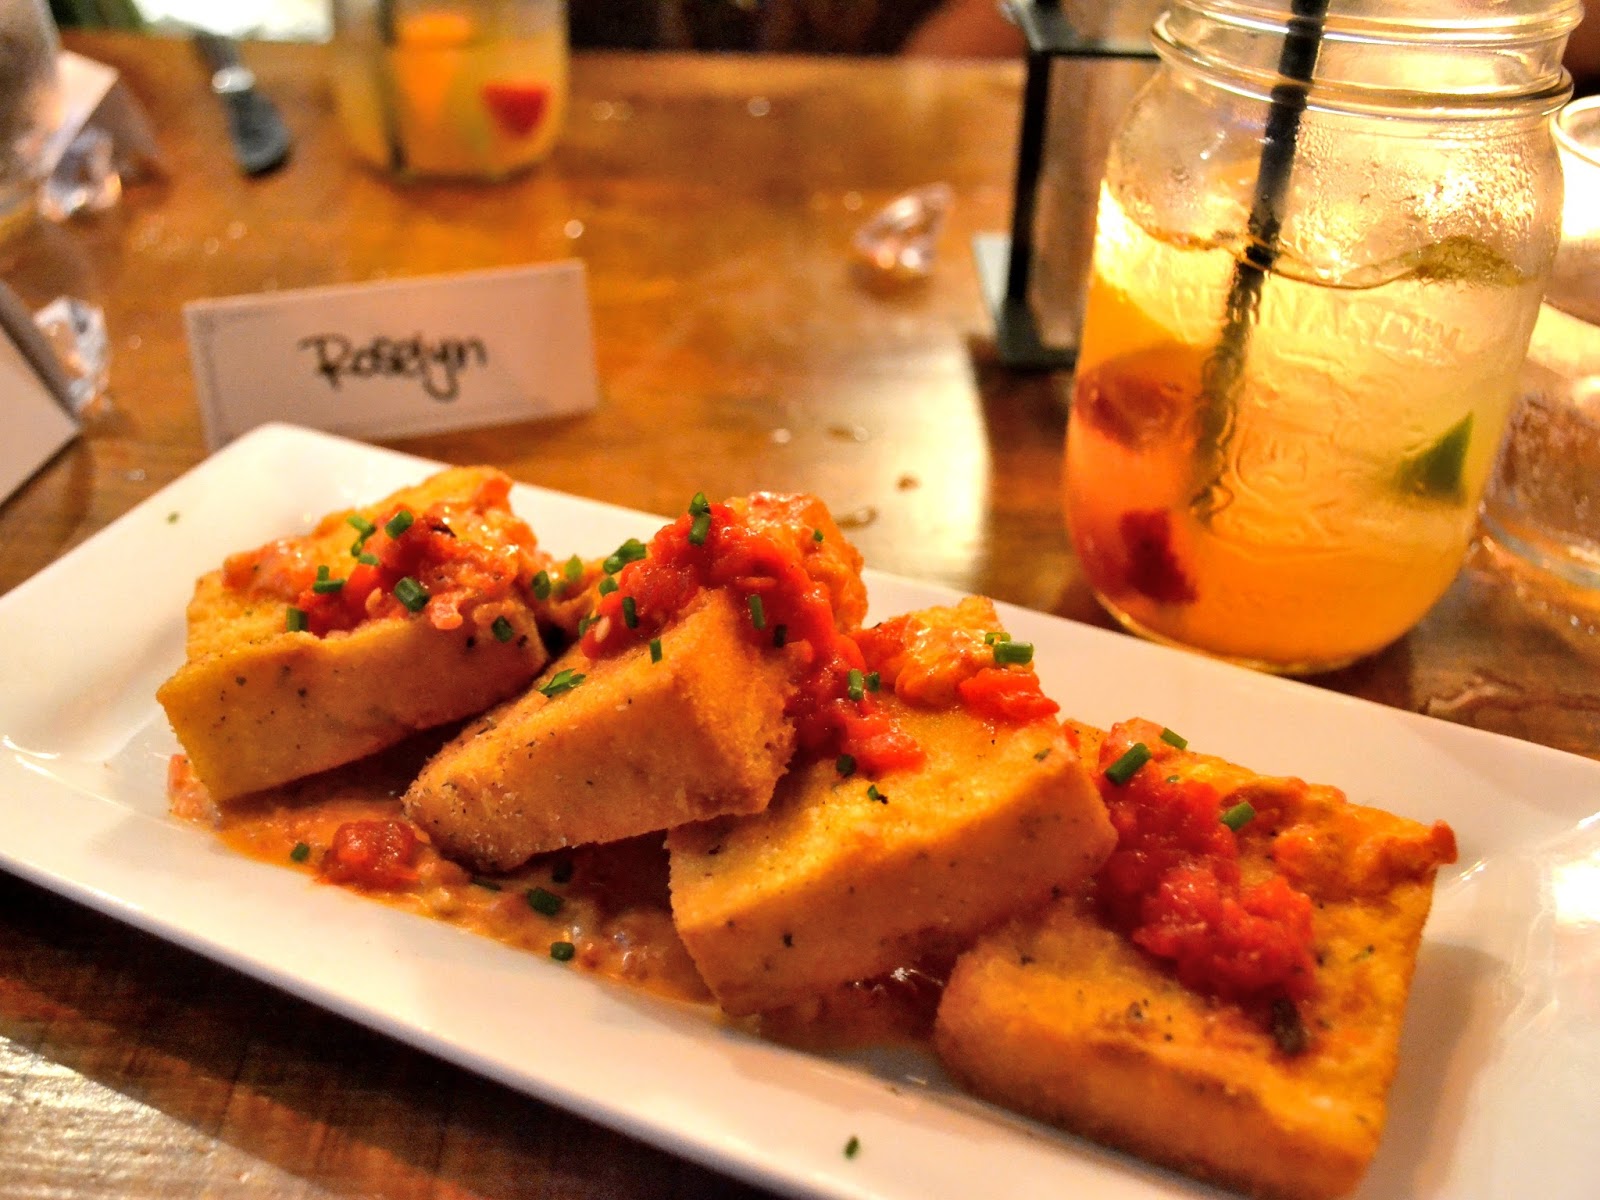 Flavours of Spain at Tango Nuevo